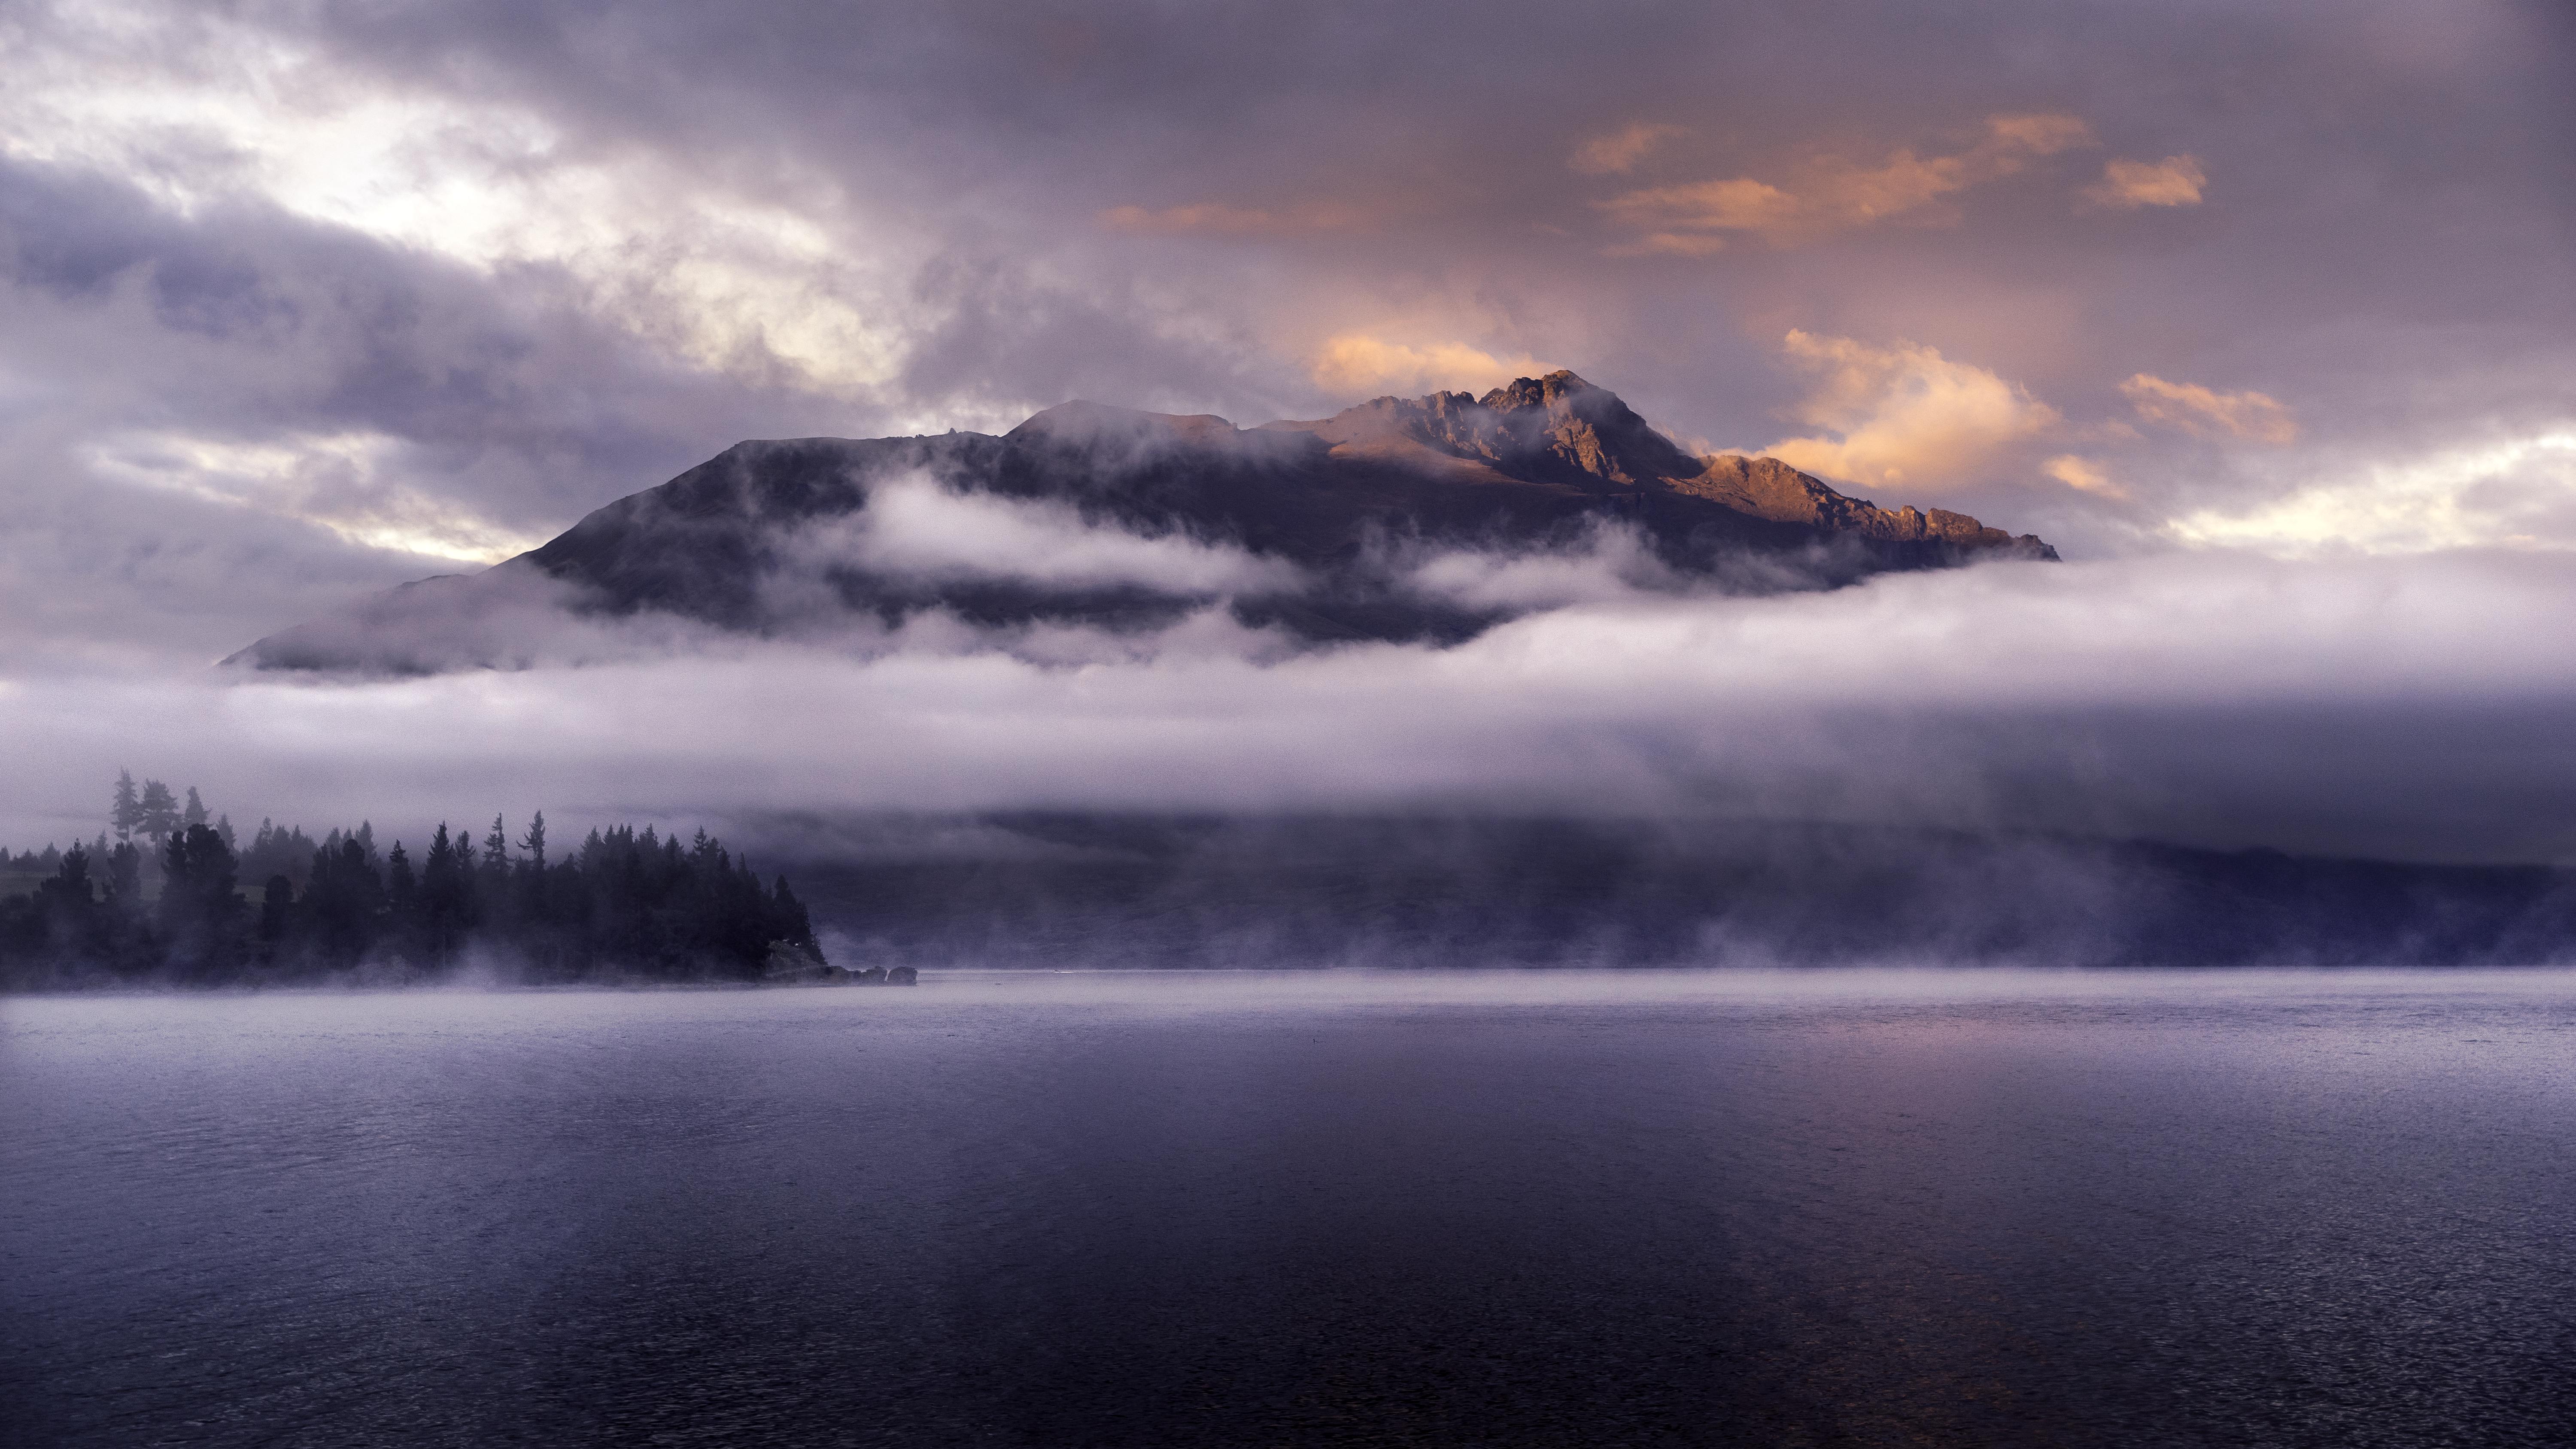 new zealand, tops, fog, nature, mountains, clouds, vertex, lake, queenstown wallpaper for mobile